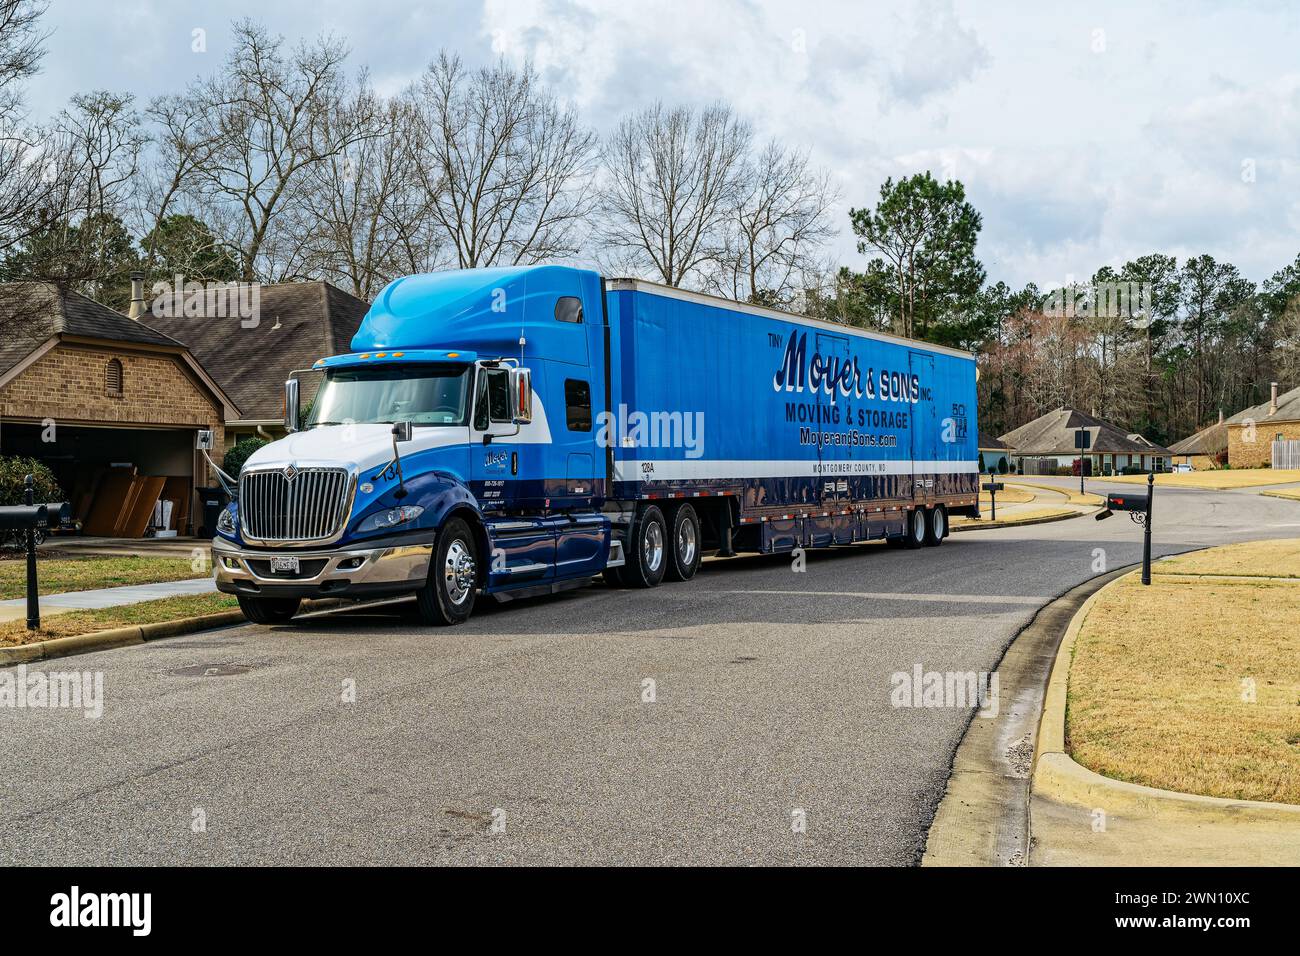 Large moving truck or van from Moyer and Sons moving company in front of a residential home in Pike Road Alabama, USA. Stock Photo